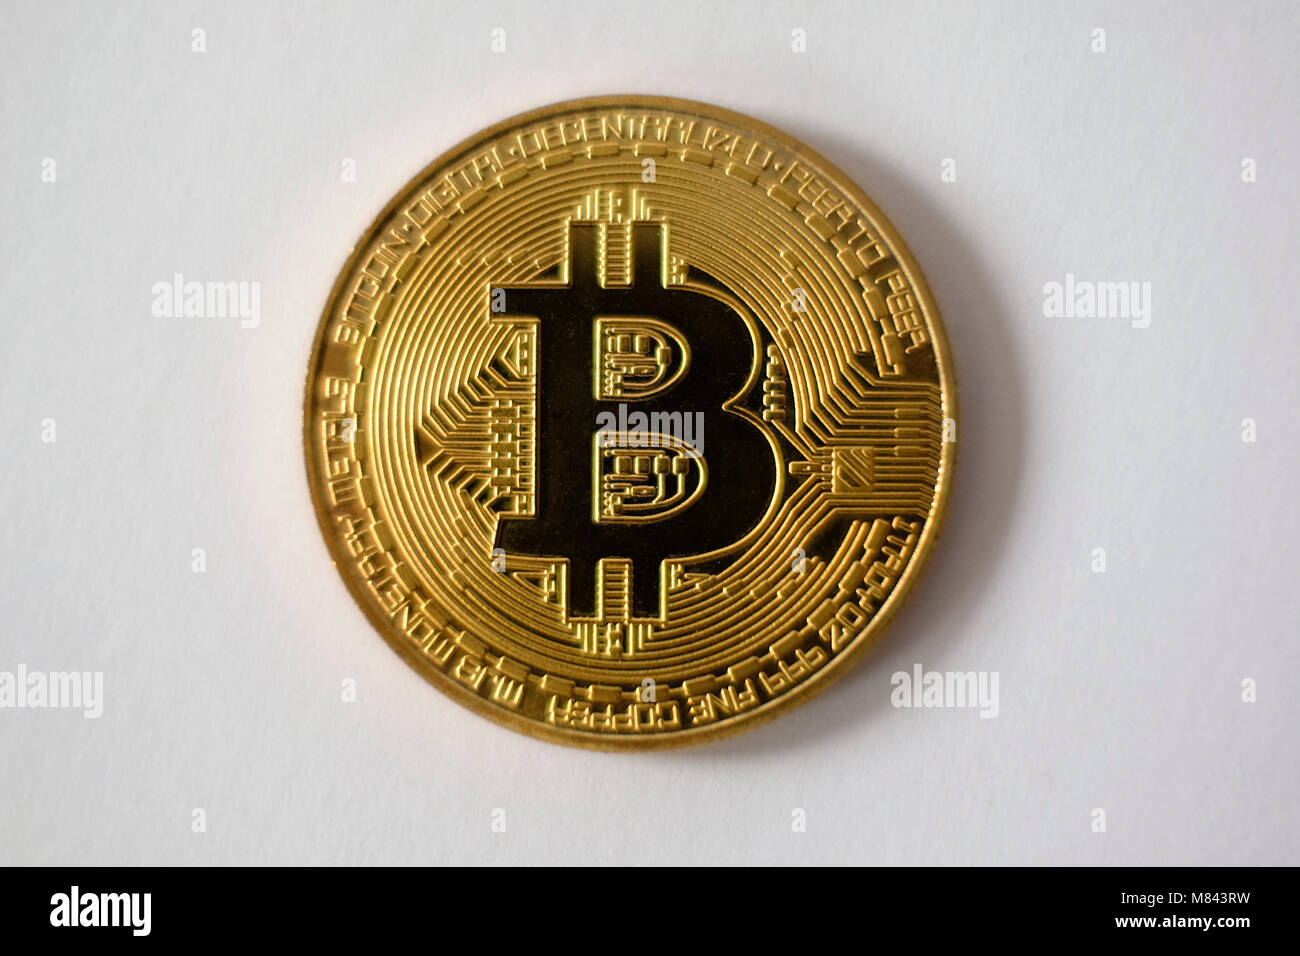 Bitcoin token coin cut out isolated on white background Stock Photo